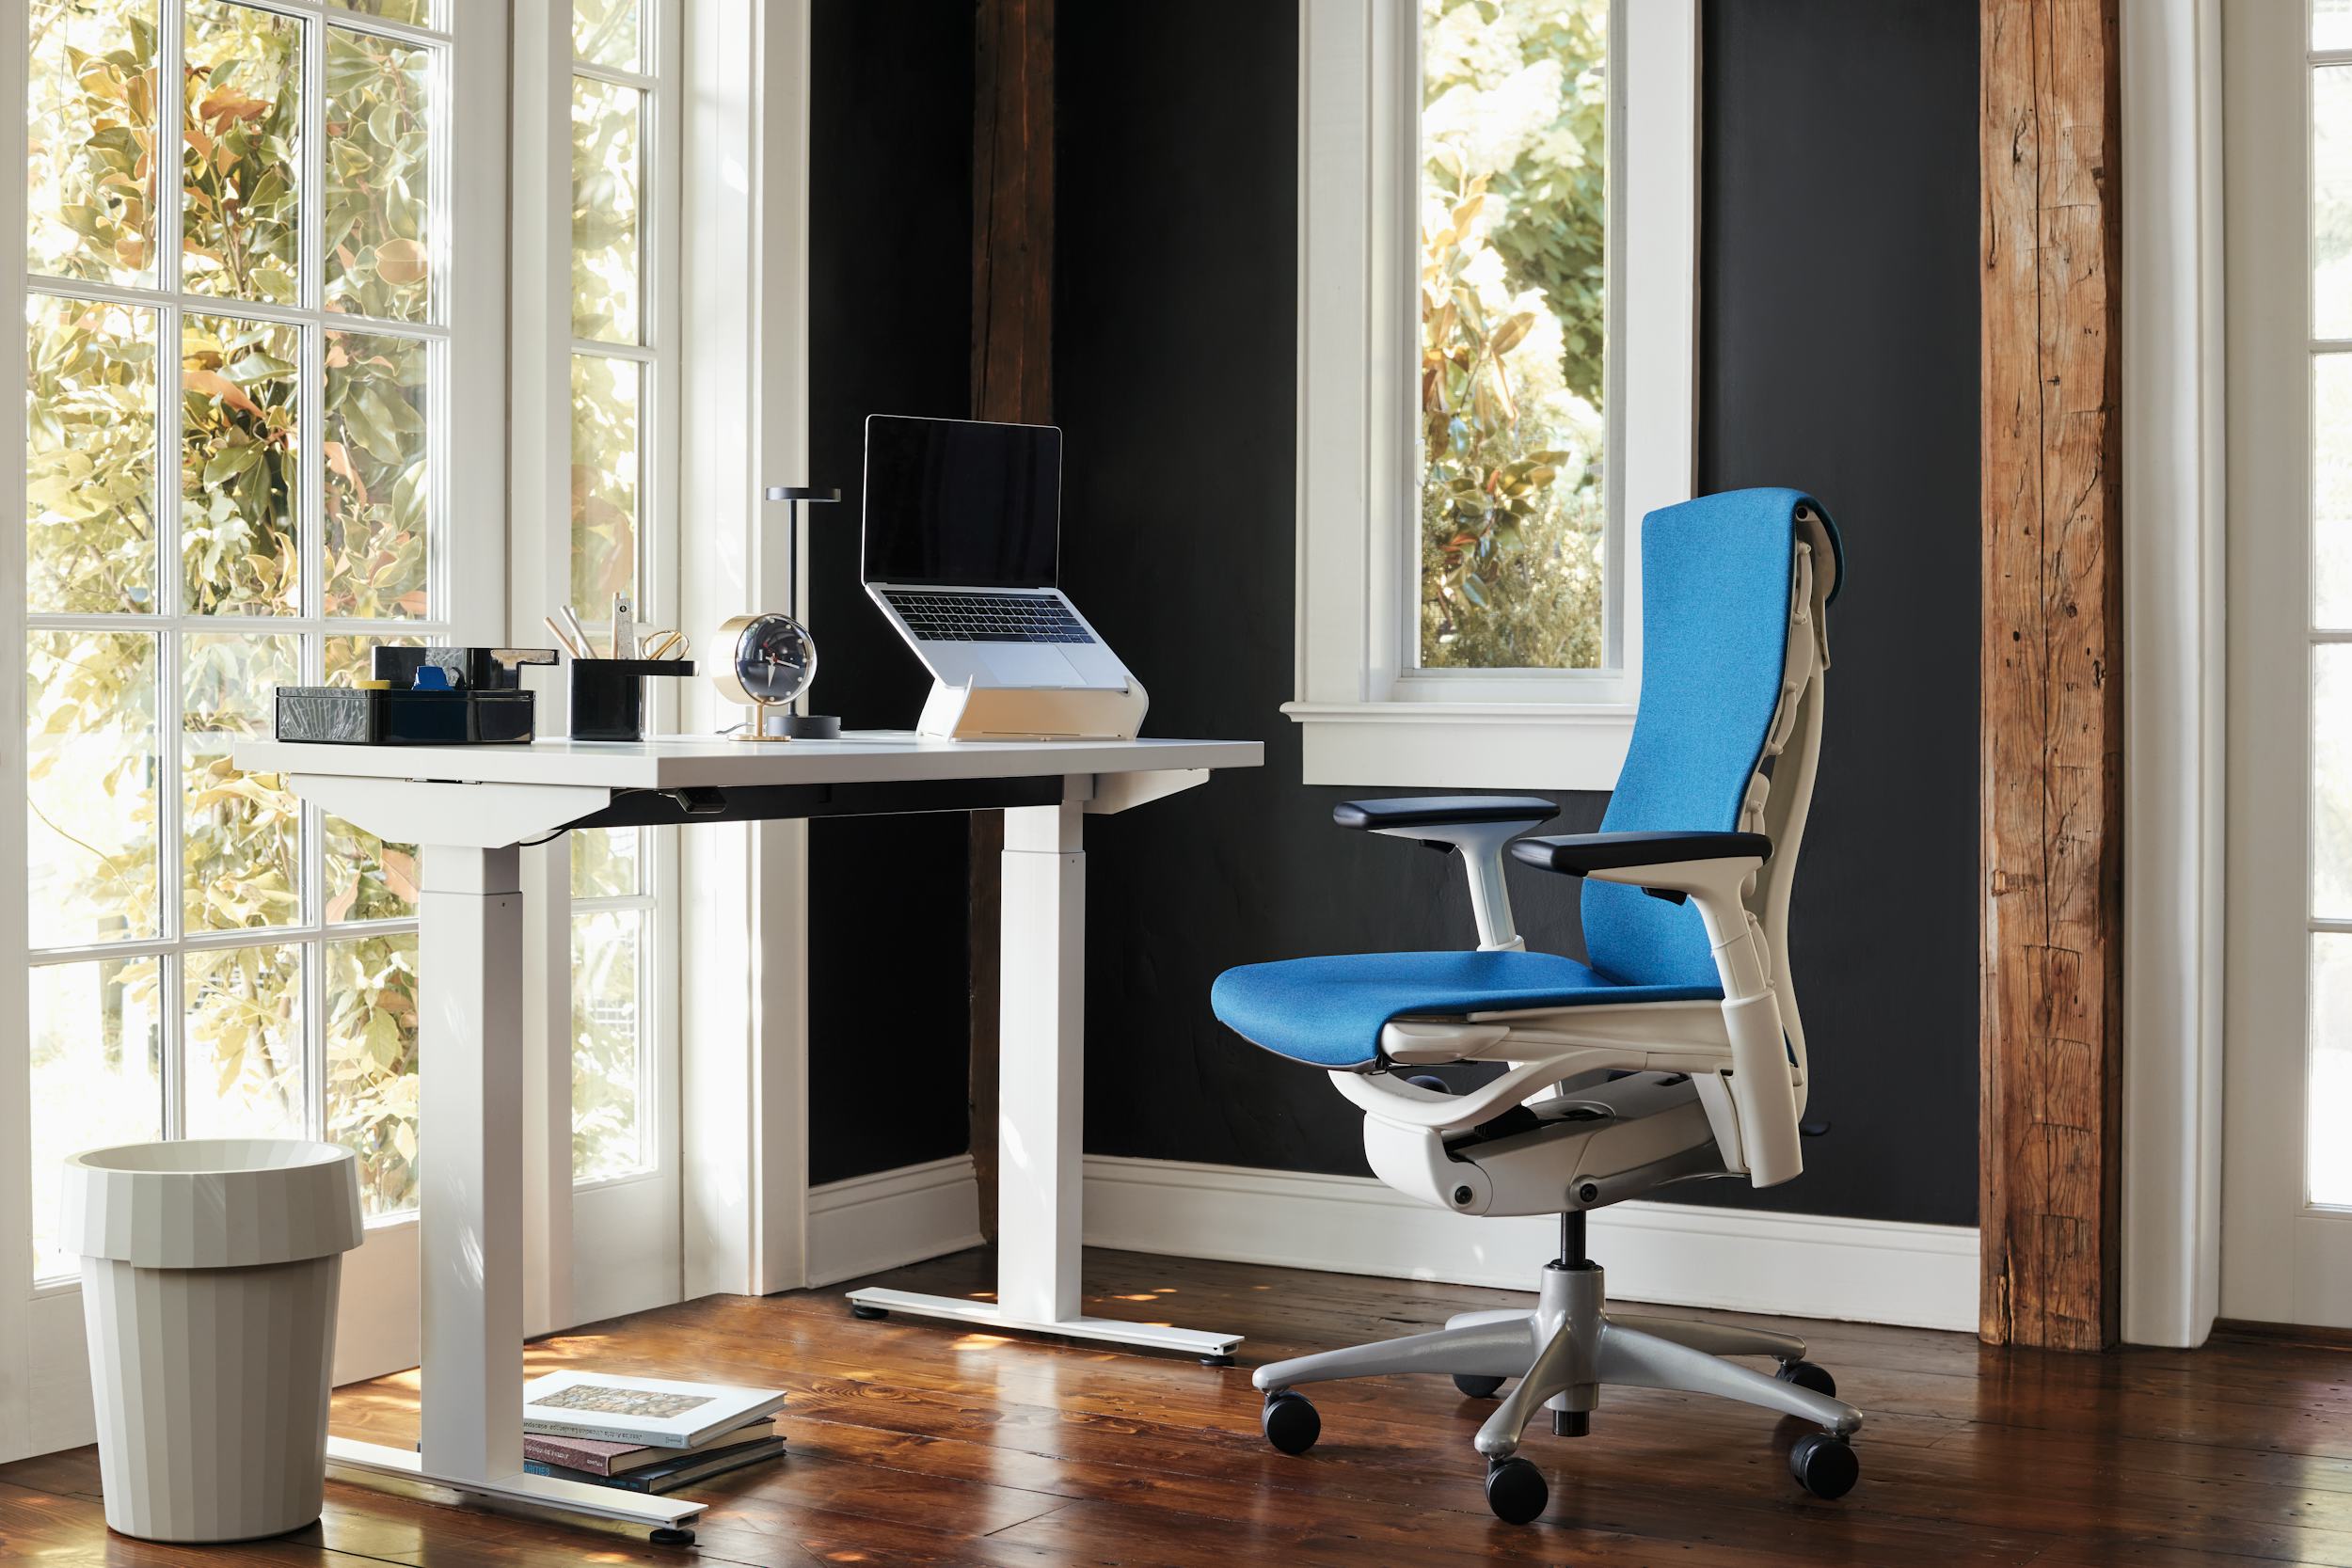 Embody Chair – Herman Miller  Embody chair, Home office chairs, Work chair